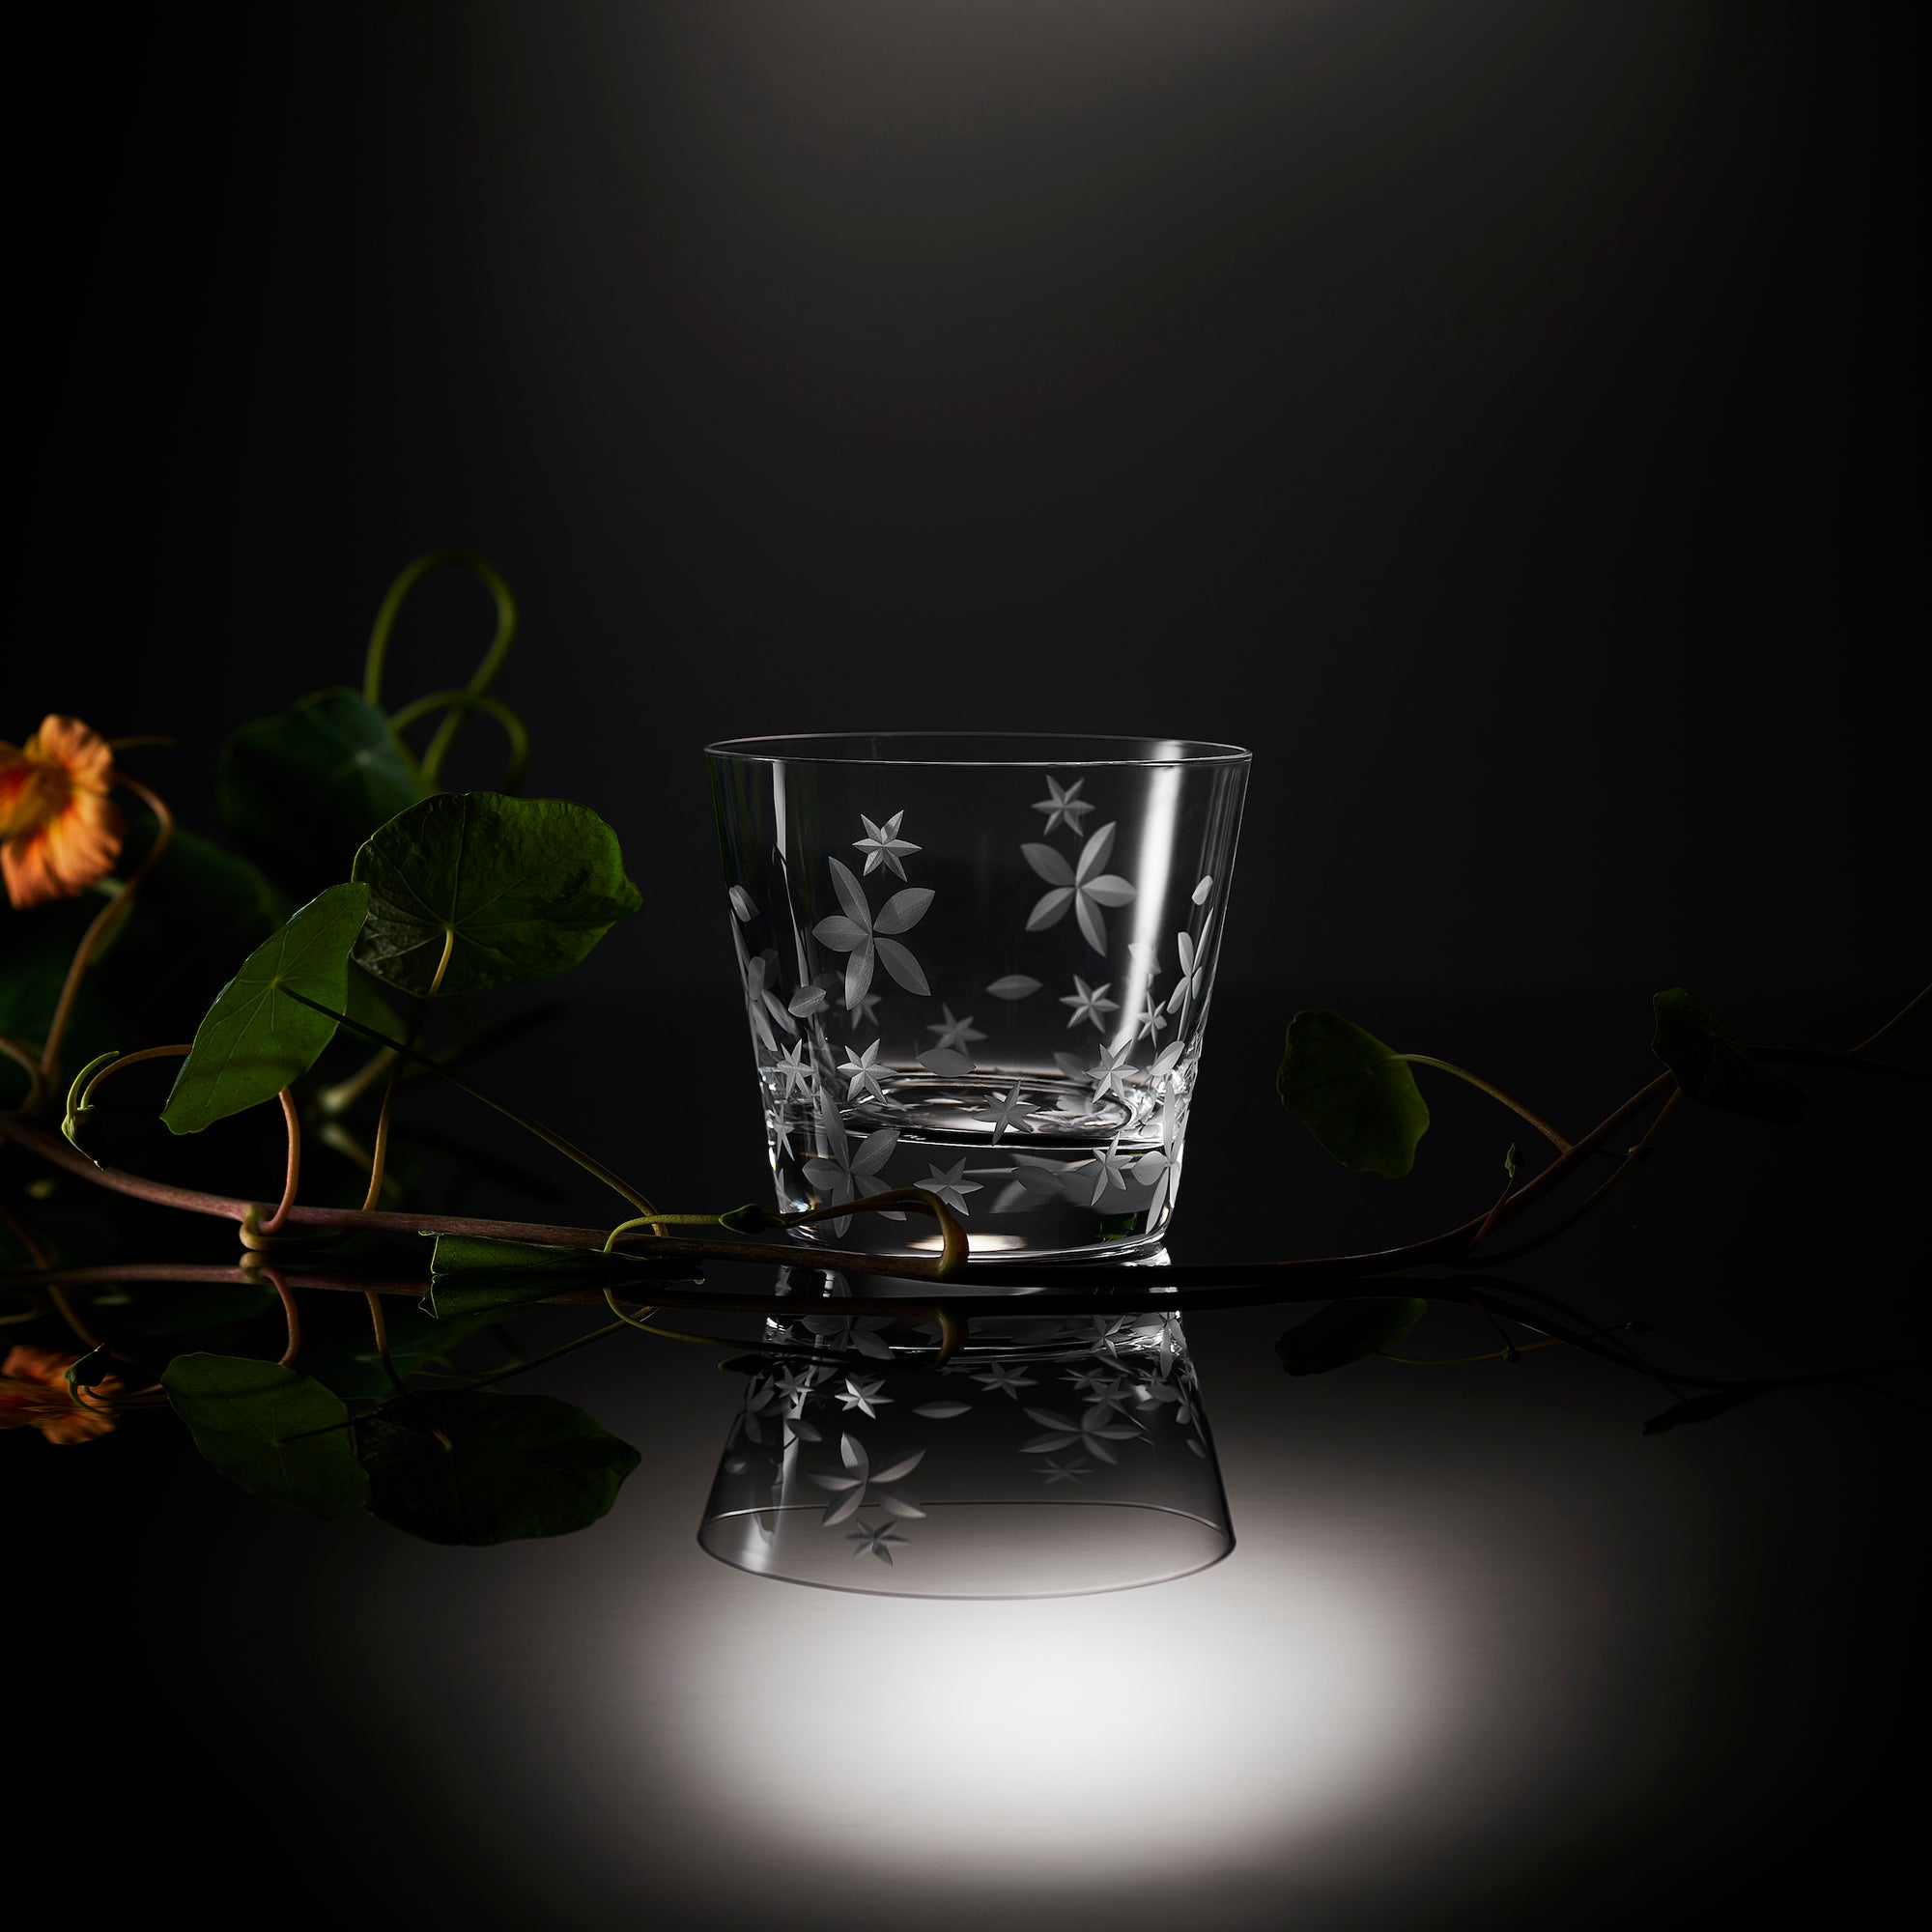 Chatham Bloom Tumbler by Caskata; a lead-free crystal rocks glasses etched with a floral design.